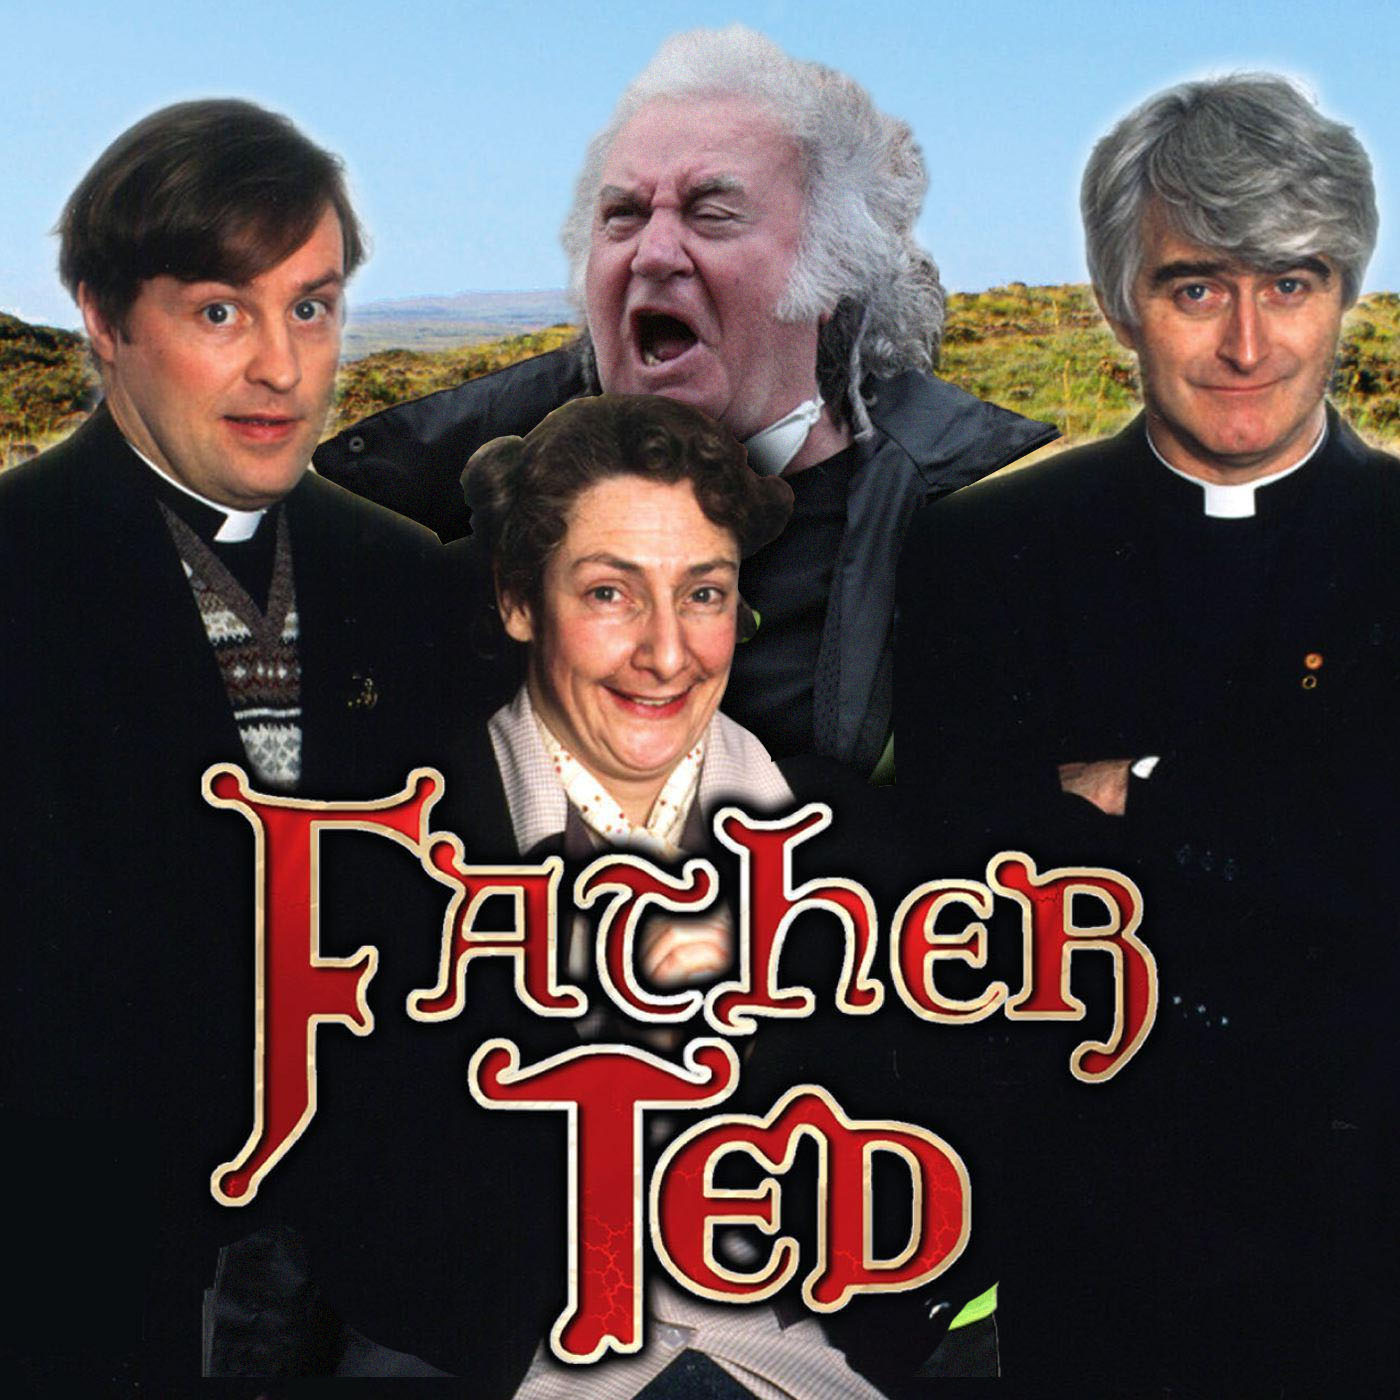 You'll only get it if you know Father Ted...